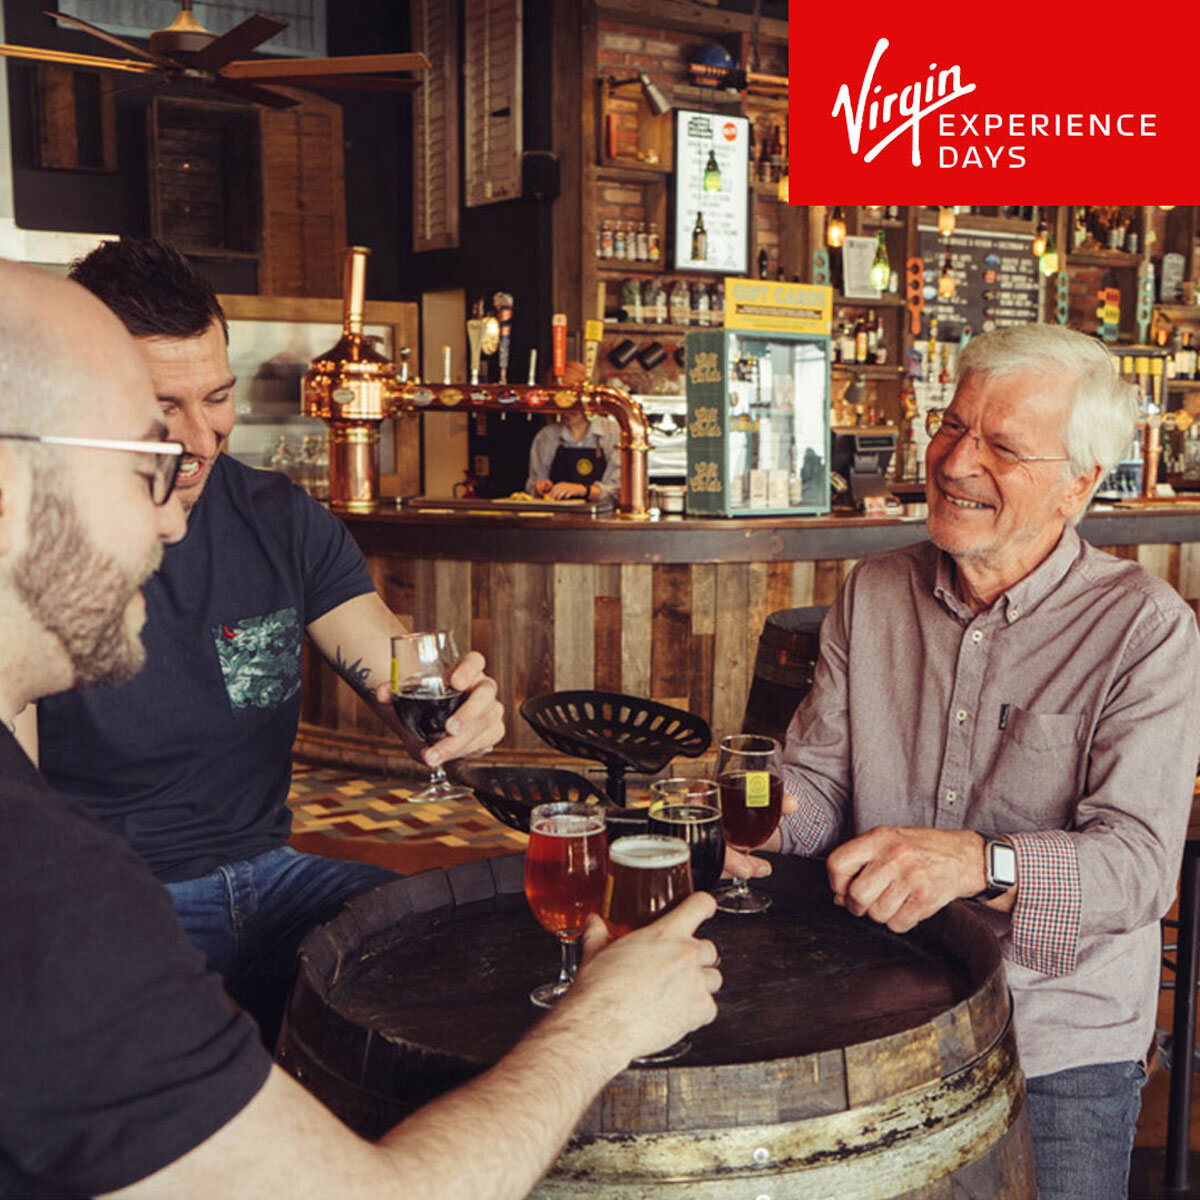 Virgin Experience Days Beer Masterclass with Gourmet Burger Meal for Two People (18 Years +)